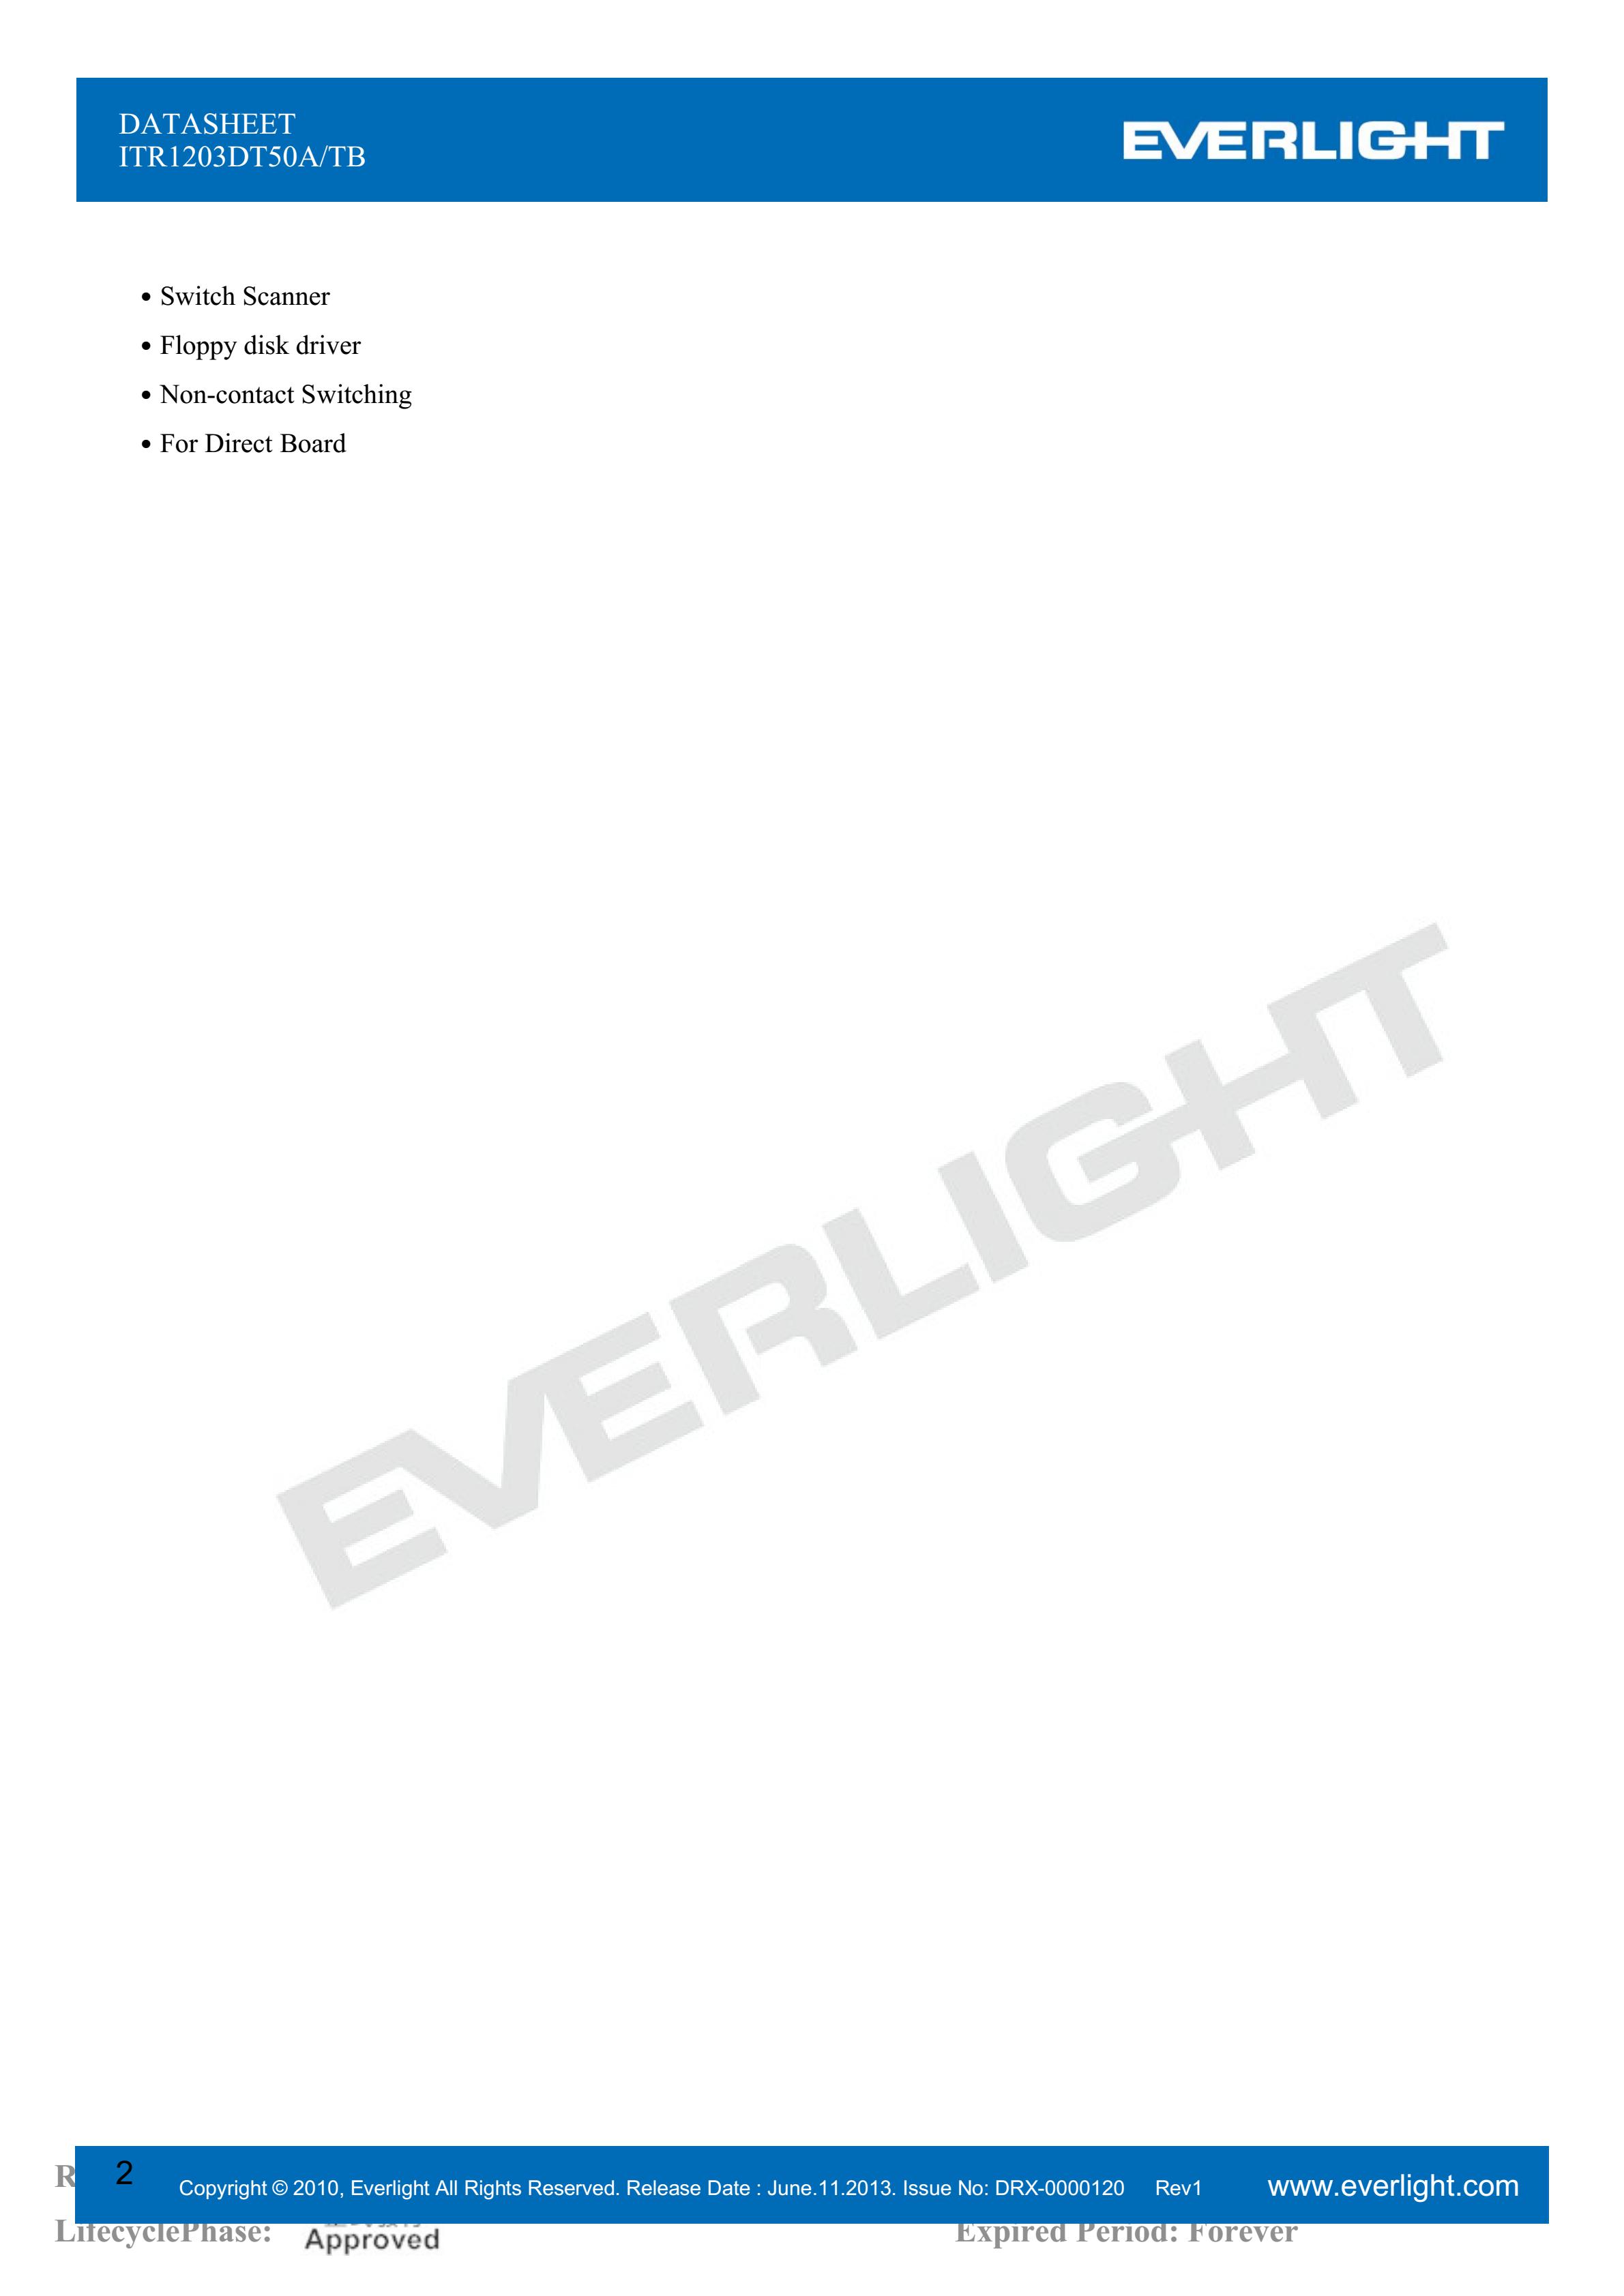 EVERLIGHT  Opto-electronic switch  ITR1203DT50A/TB Datashe